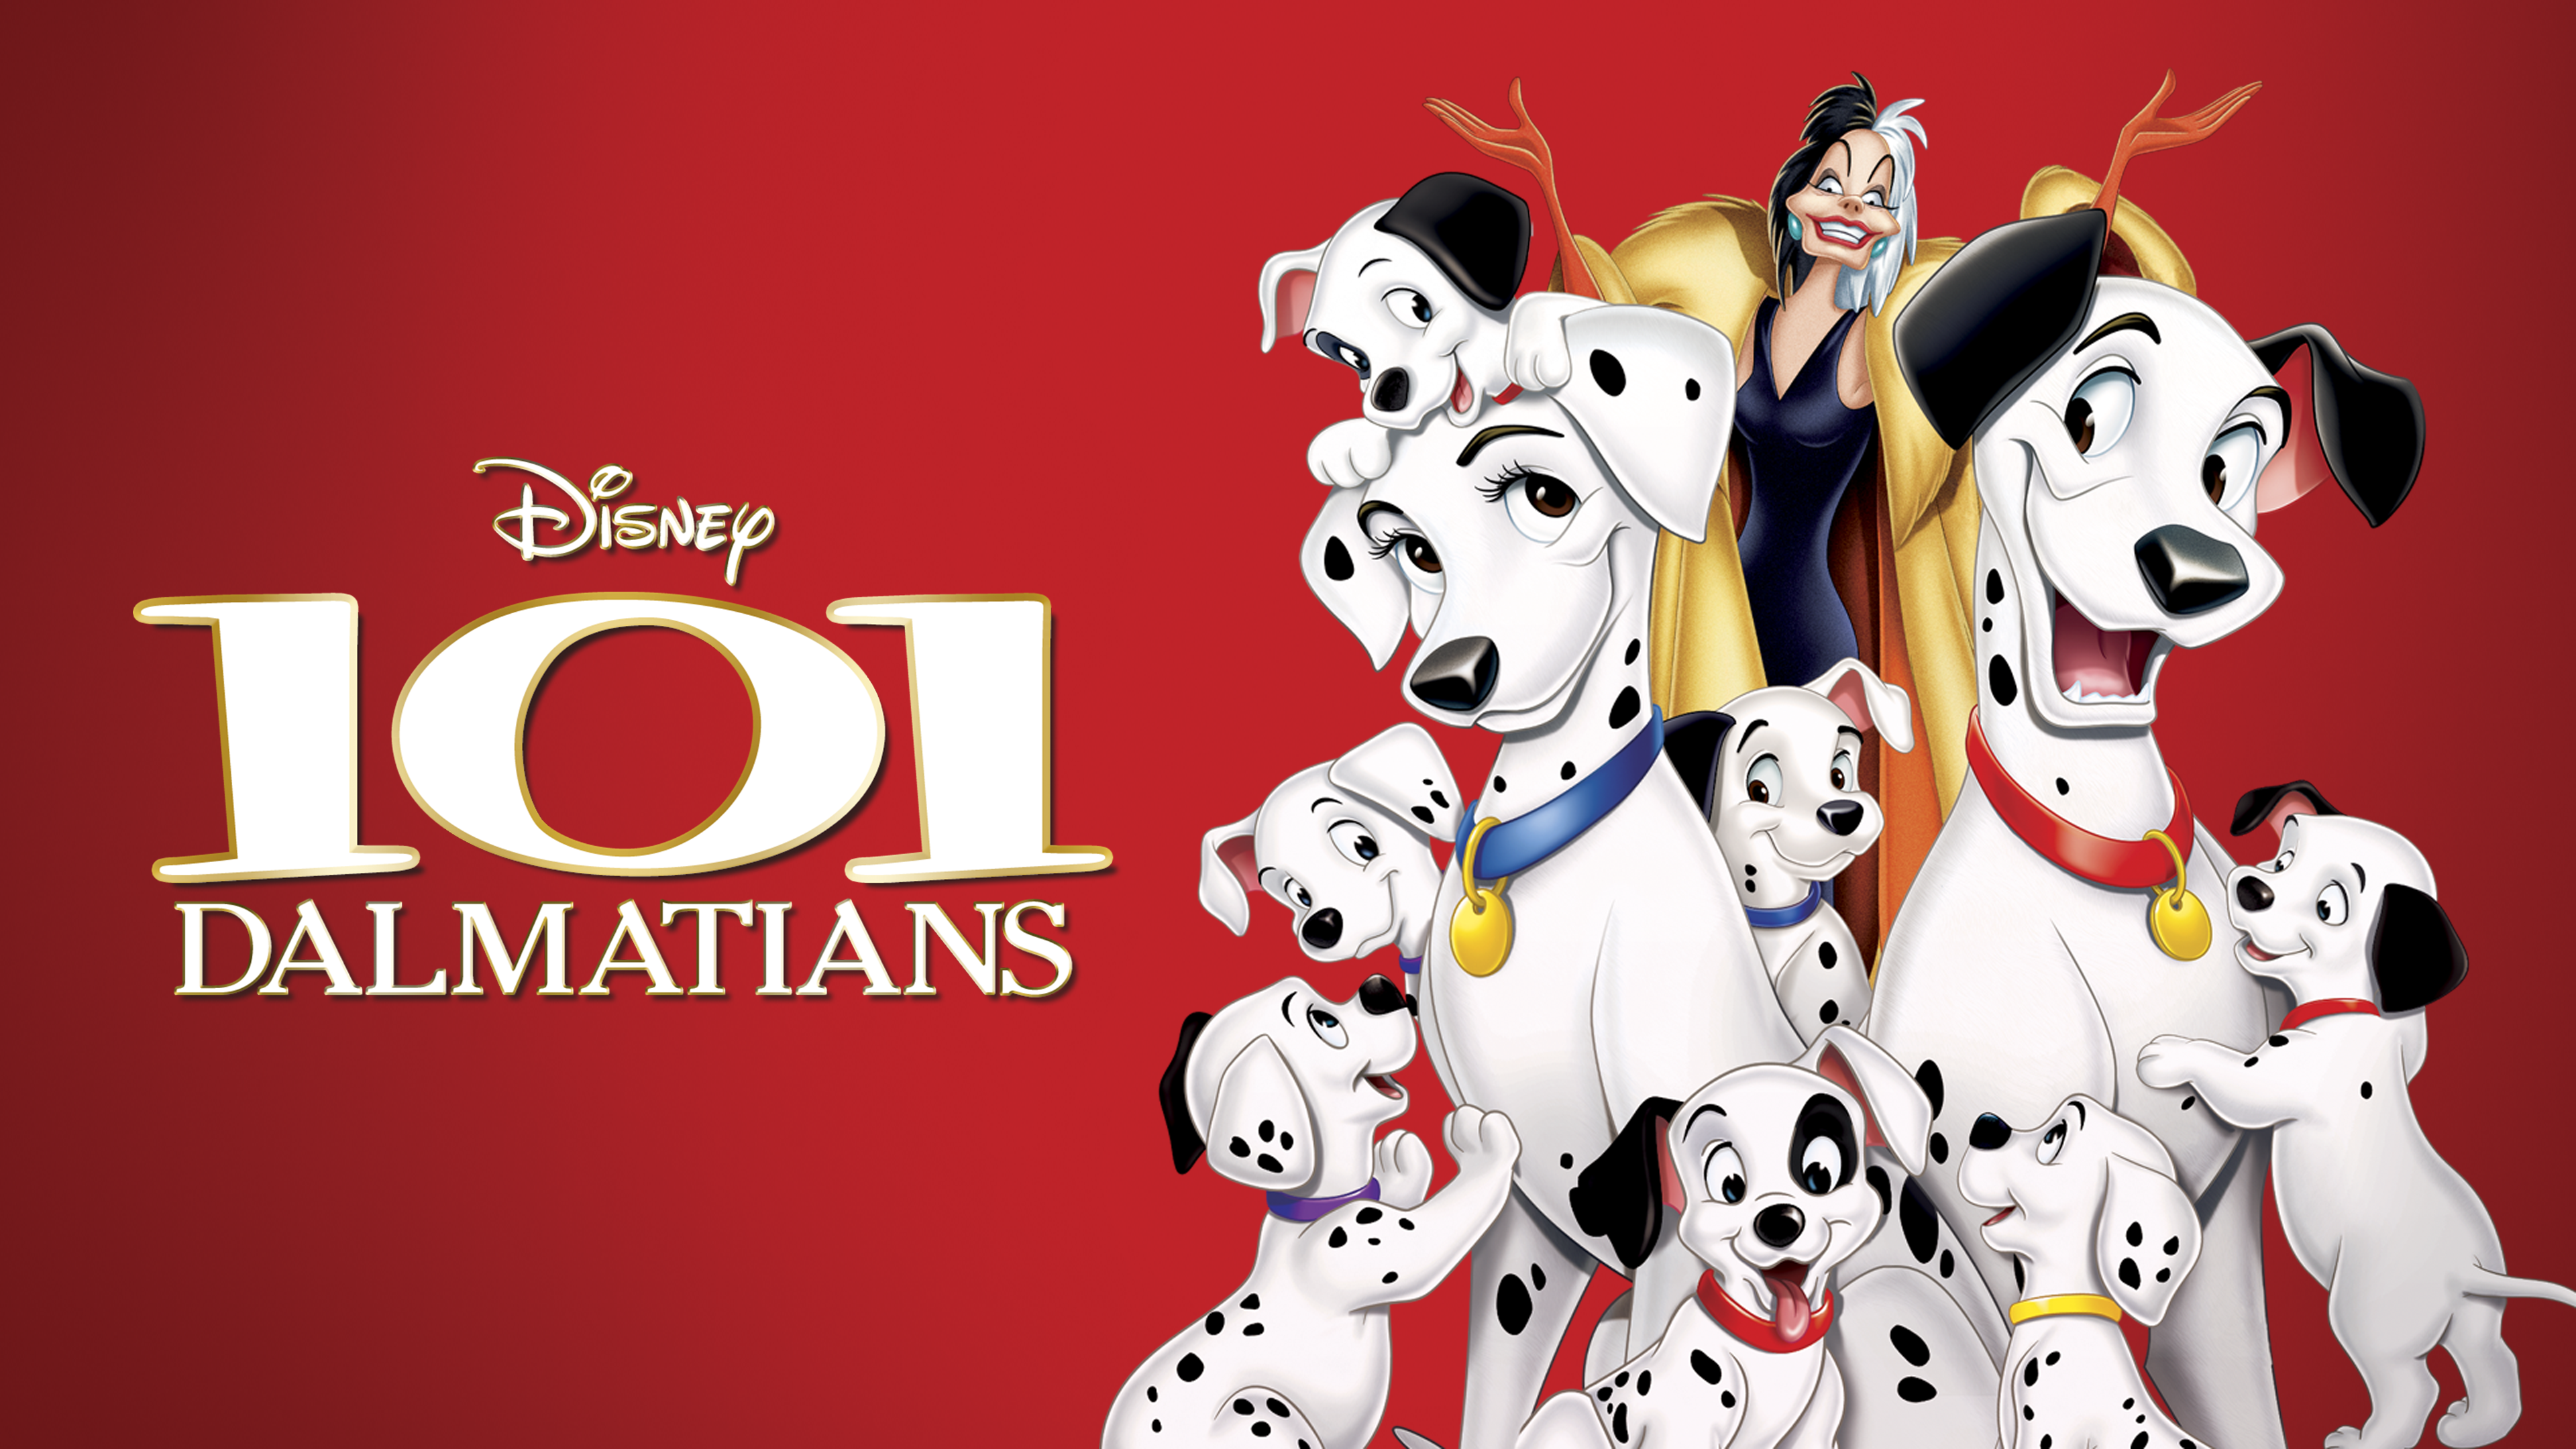 20 Weeks of Disney Animation: ‘One Hundred and One Dalmatians’